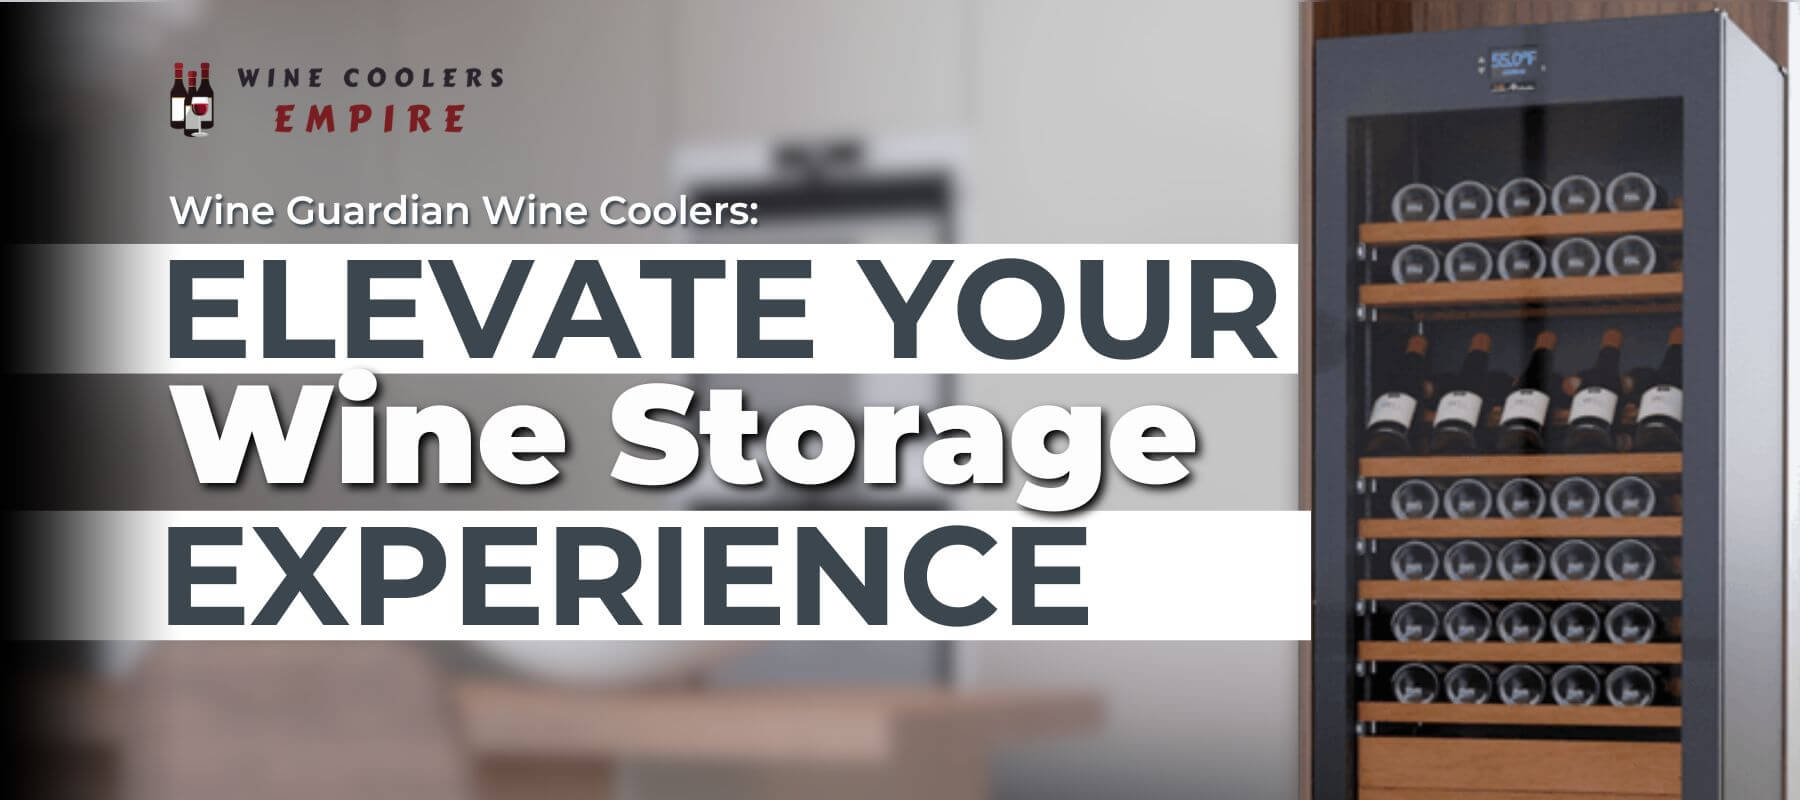 Wine Guardian Wine Coolers: Elevate Your Wine Storage Experience